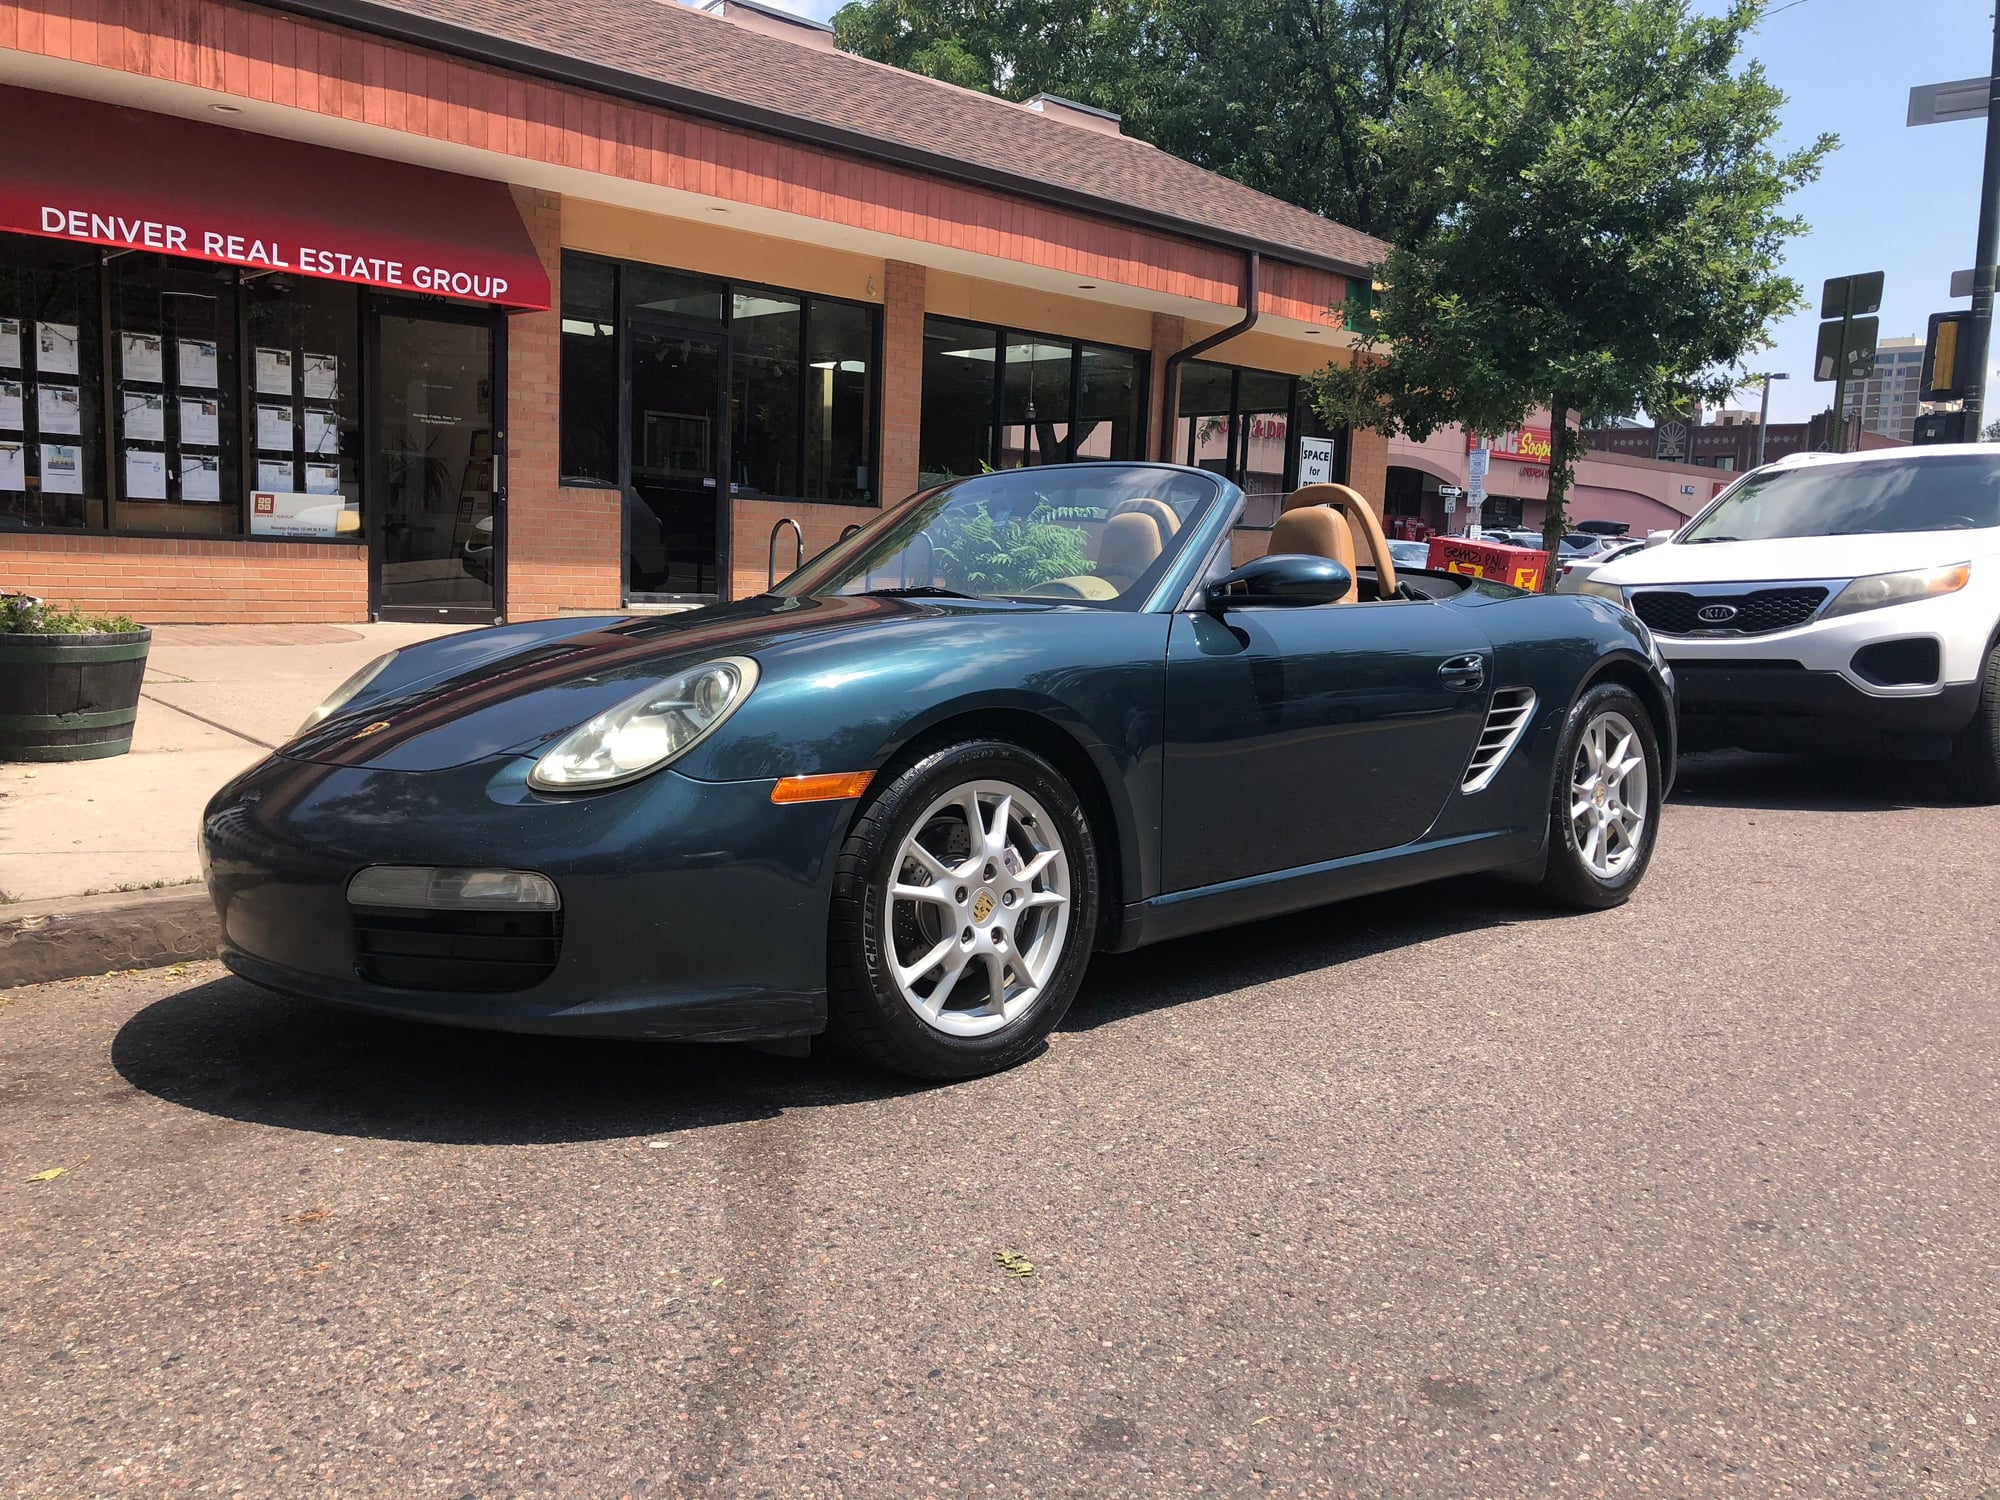 Wheels and Tires/Axles - WTB New Wheels (and potentially tires) for 987 Boxster - New or Used - Denver, CO 80204, United States